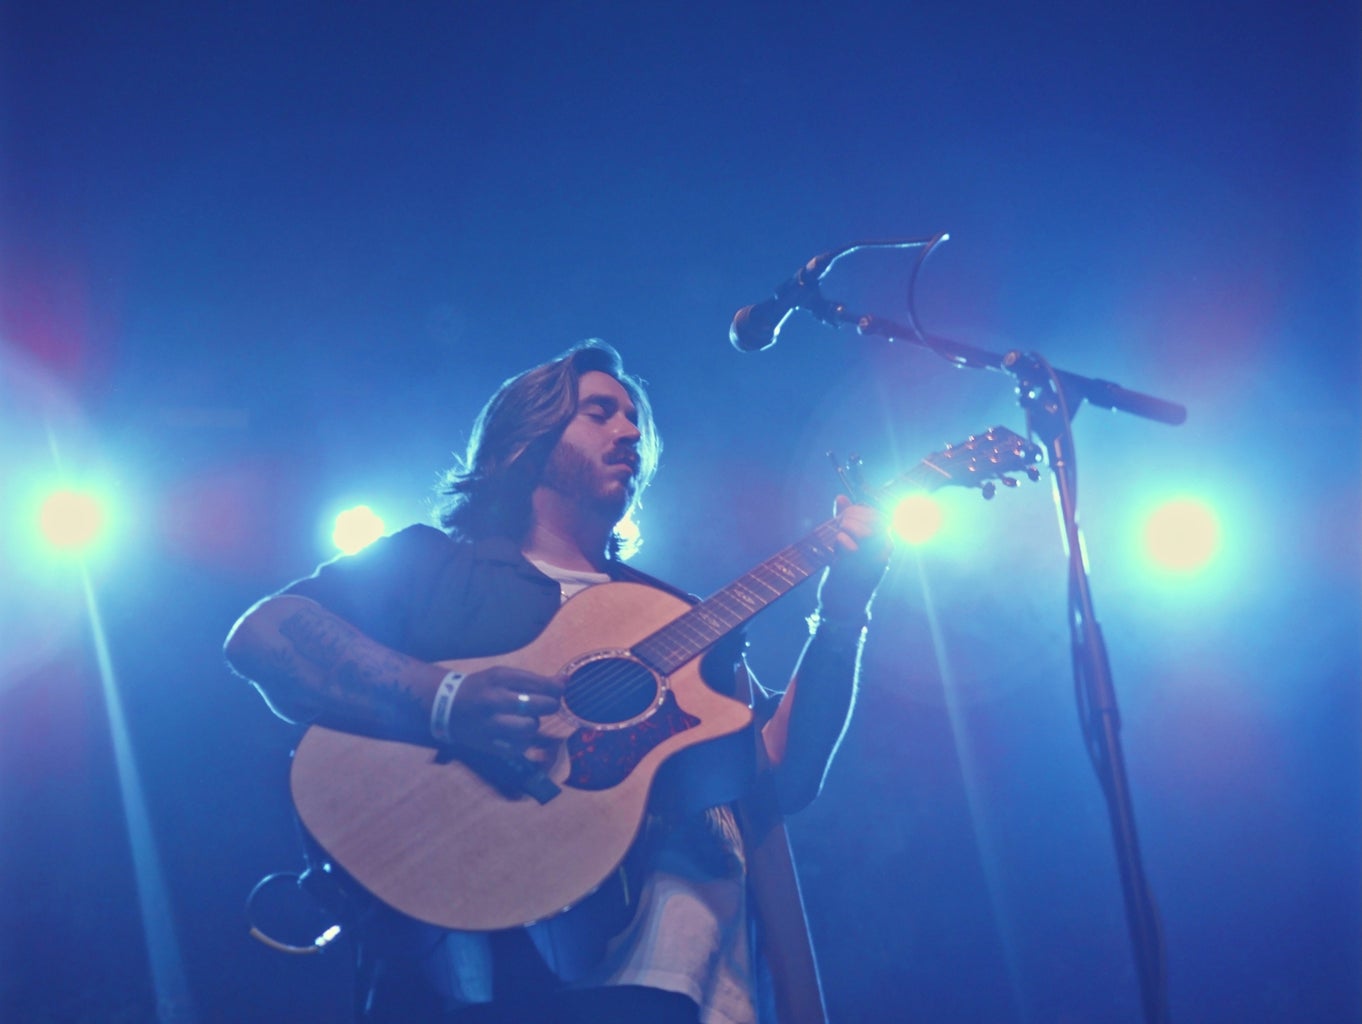 man playing guitar on stage under blue light